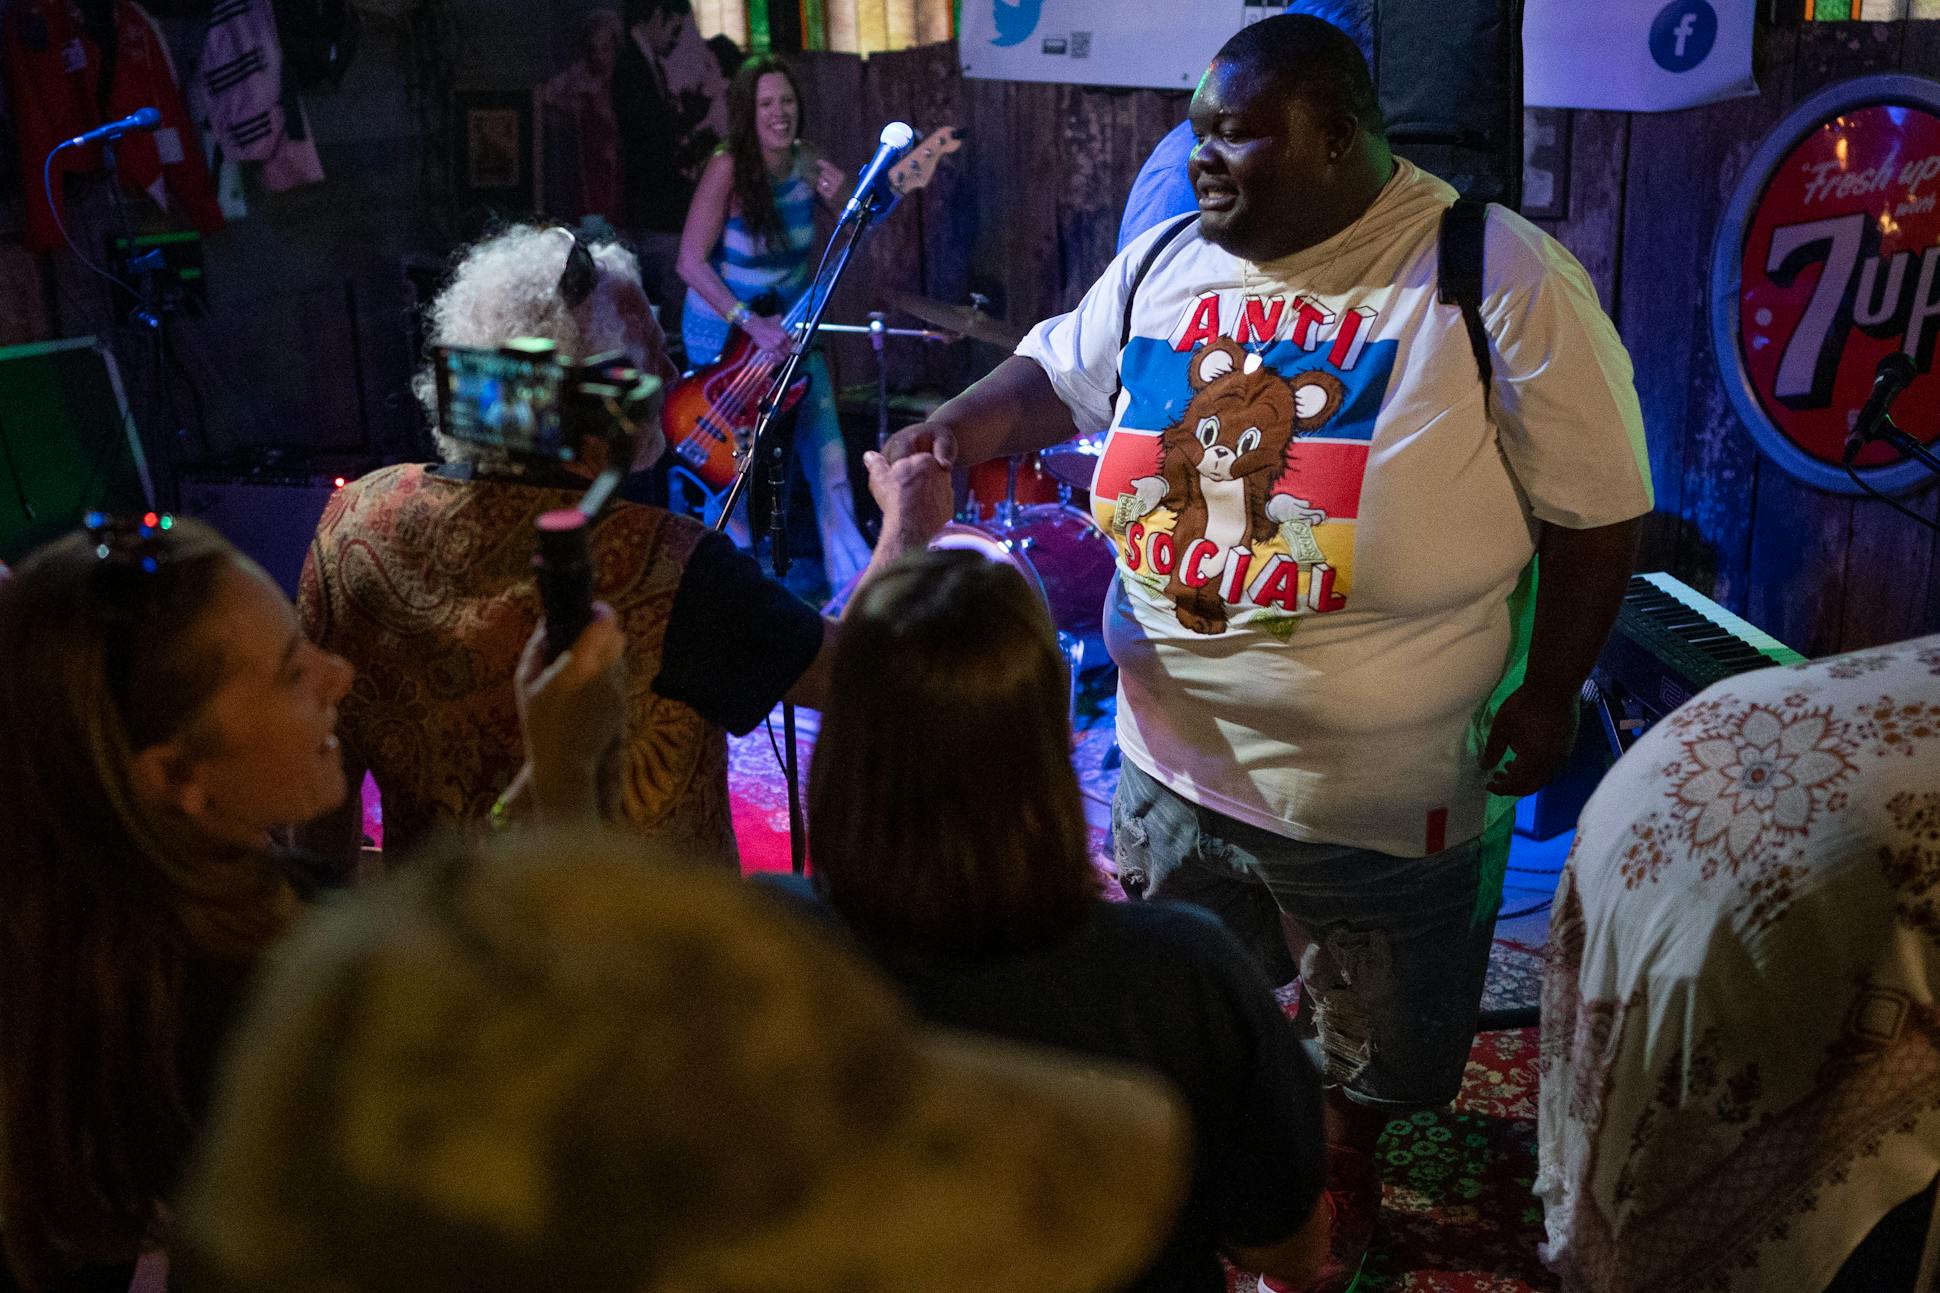 Current Clarksdale hero, Grammy-winning Christone “Kingfish” Ingram, 23, made a surprise hometown appearance with a student ensemble at Pinetop Perkins Homecoming.